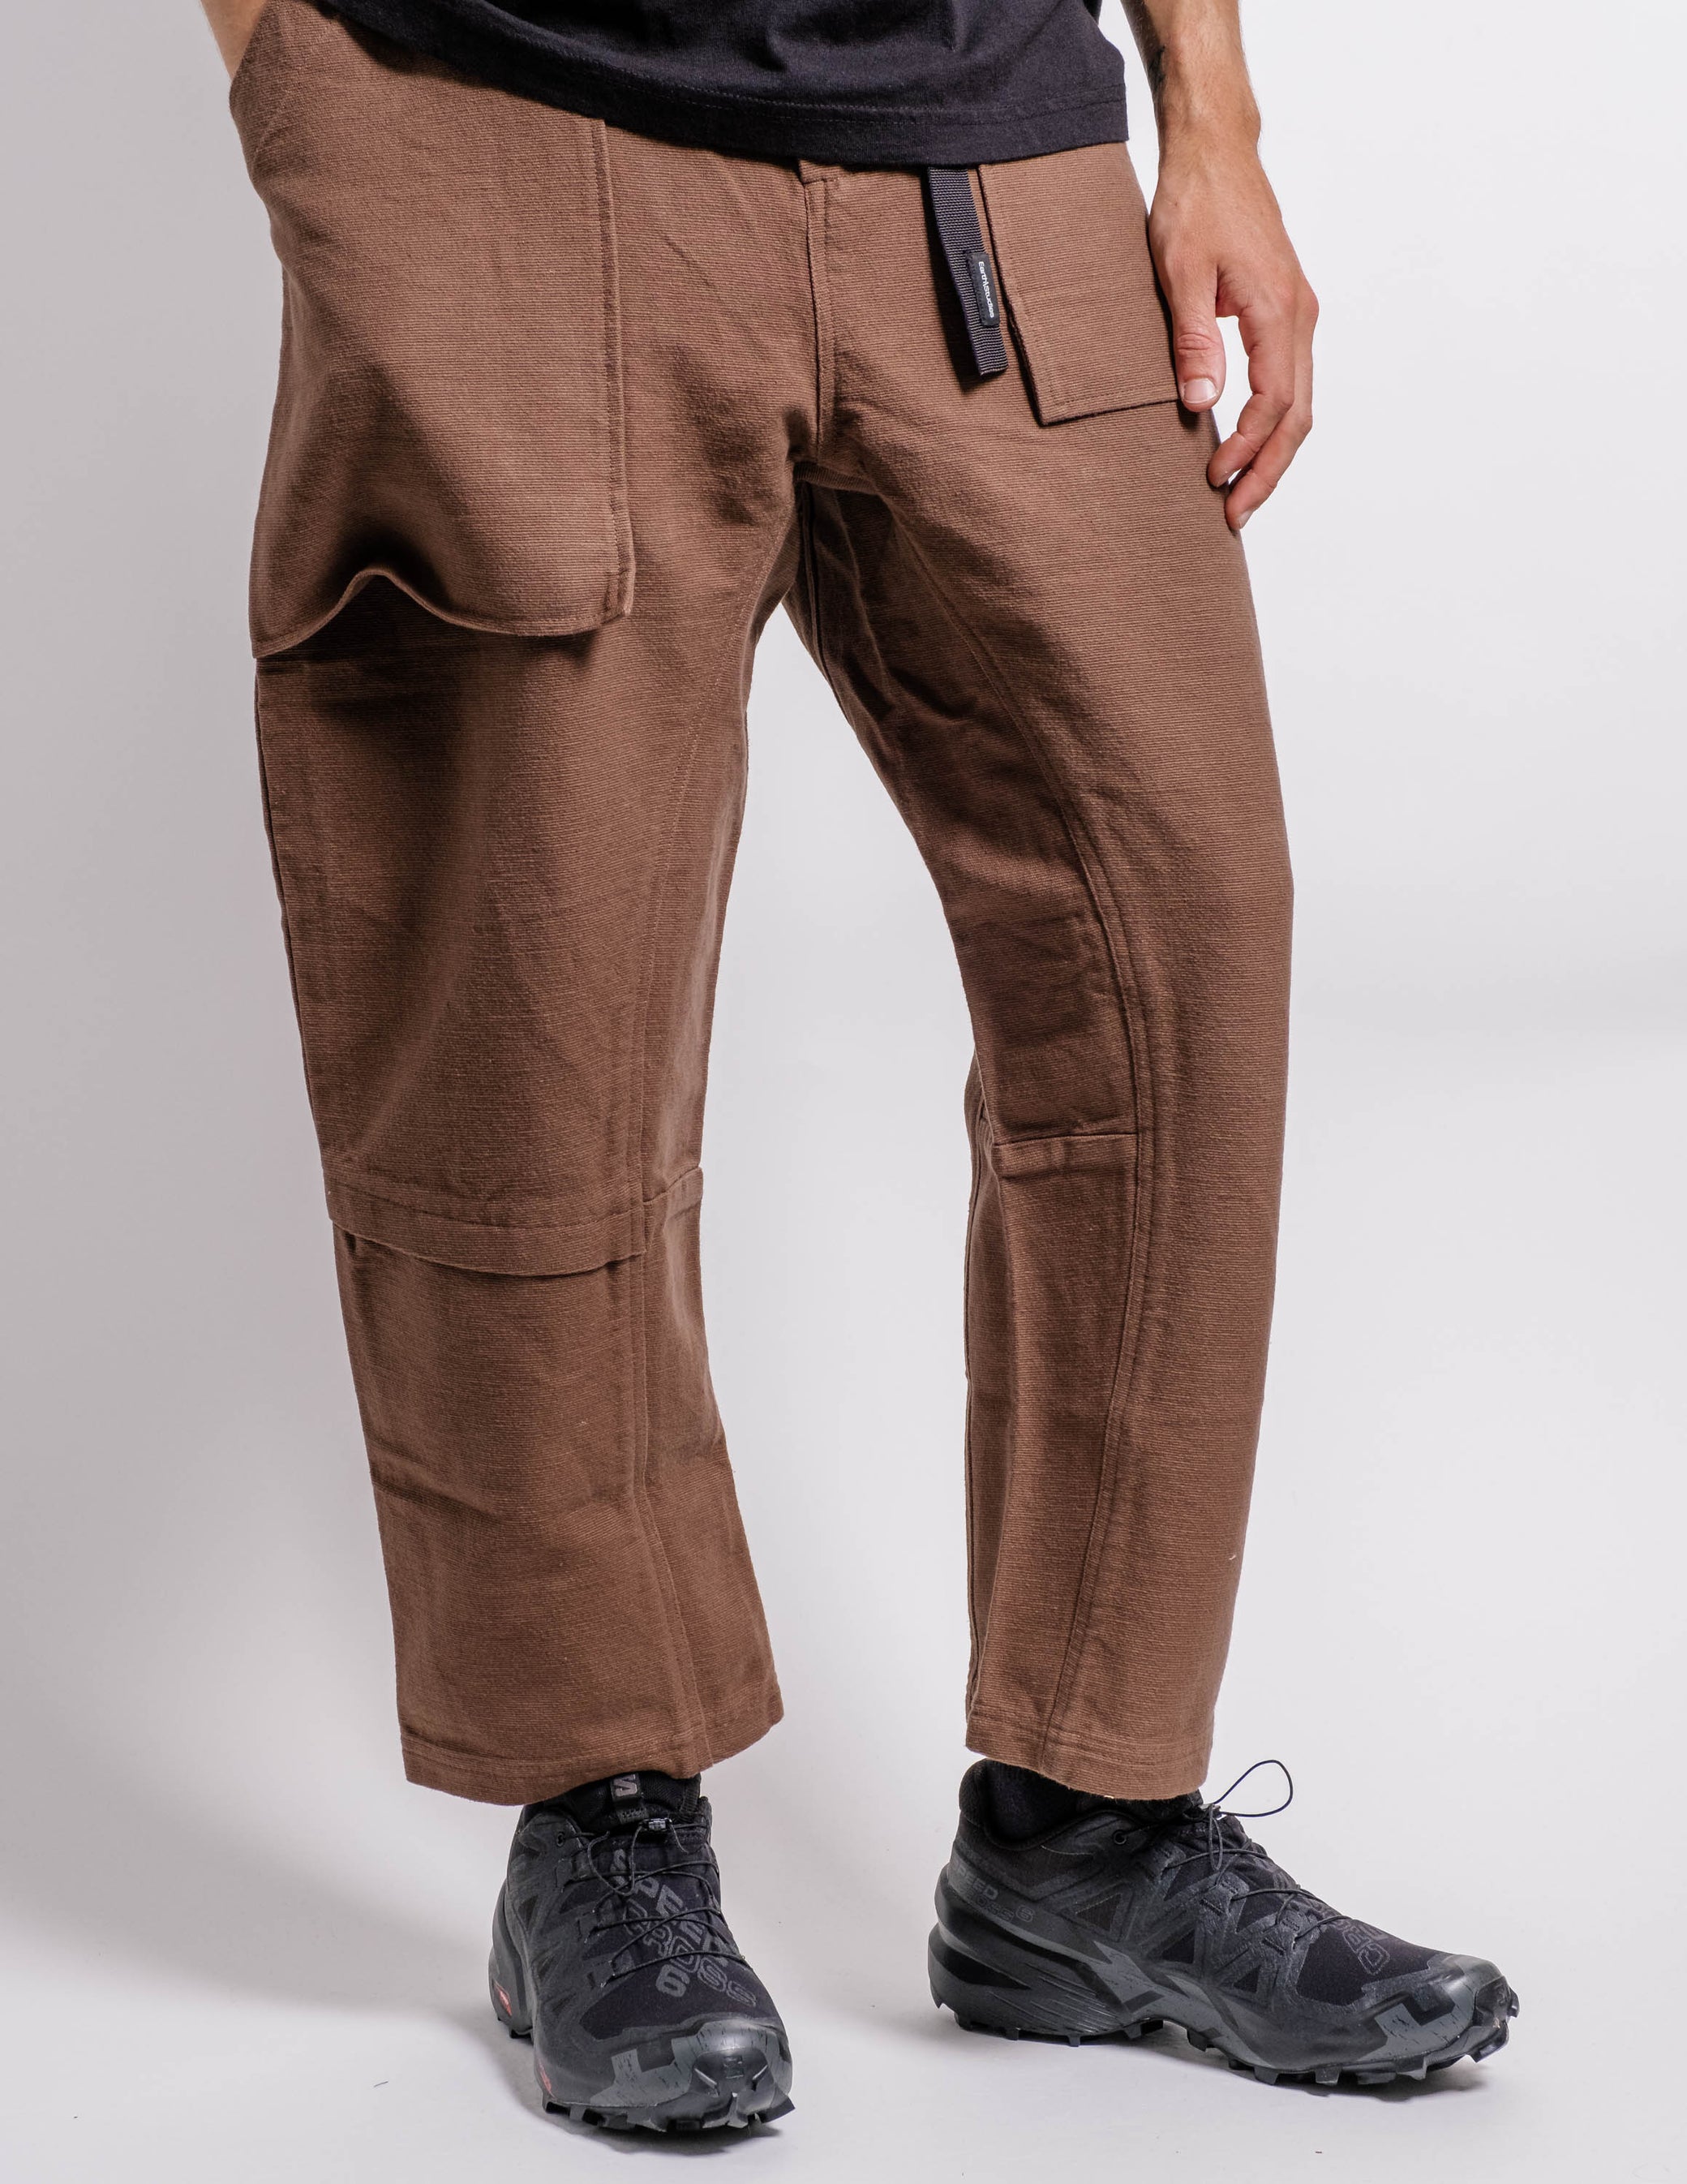 MP-103 Field Pant in Chestnut ~ Windthrow